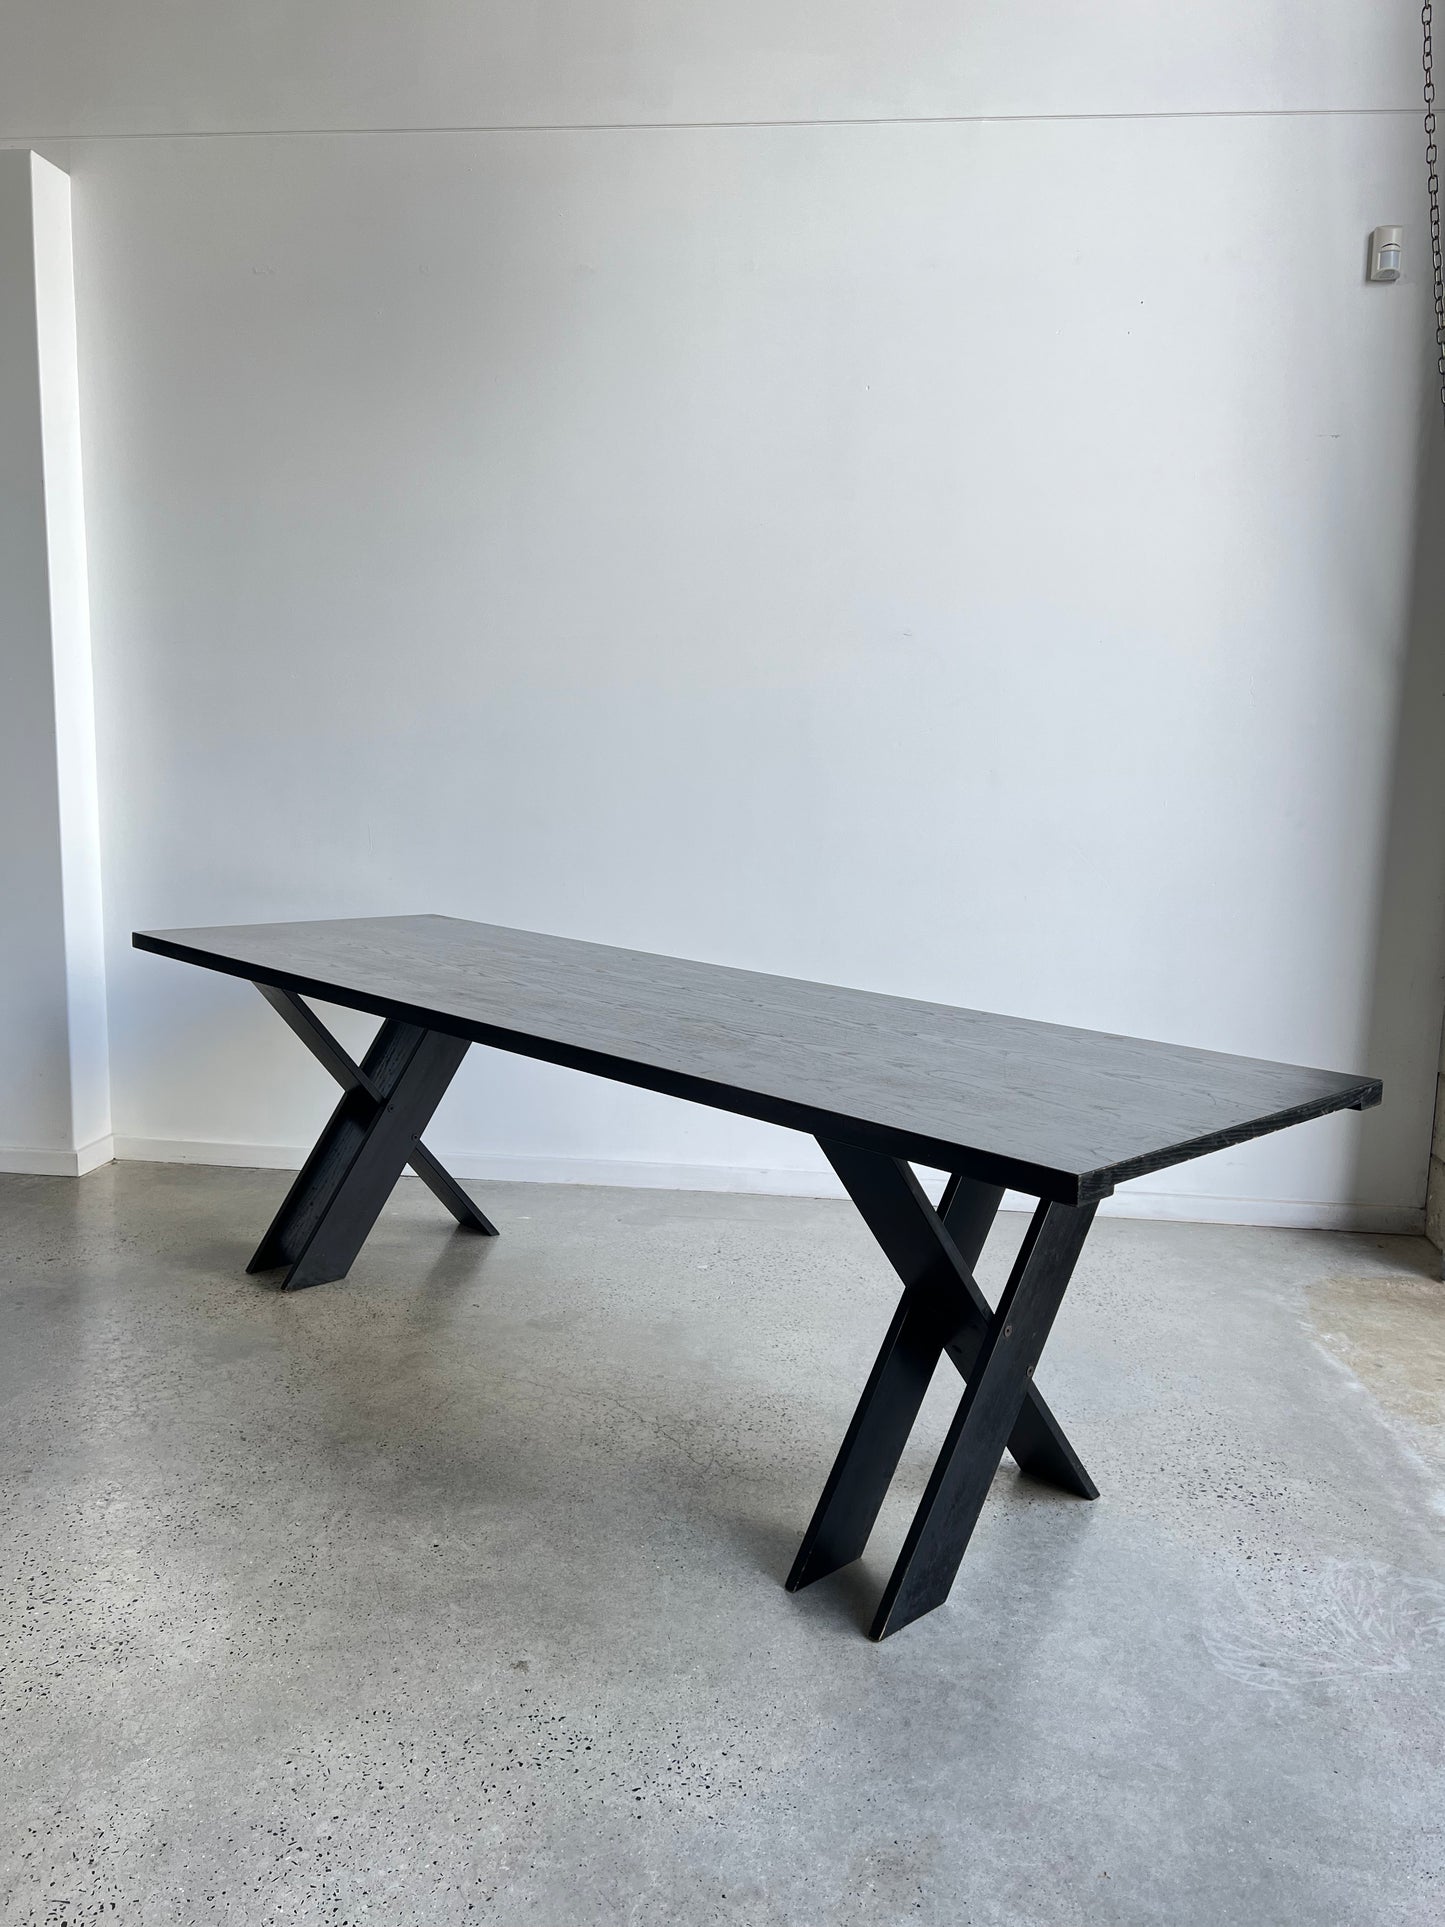 "TL 58" by Marco Zanuso for Poggi, Black Timber Dining Table, 1970s